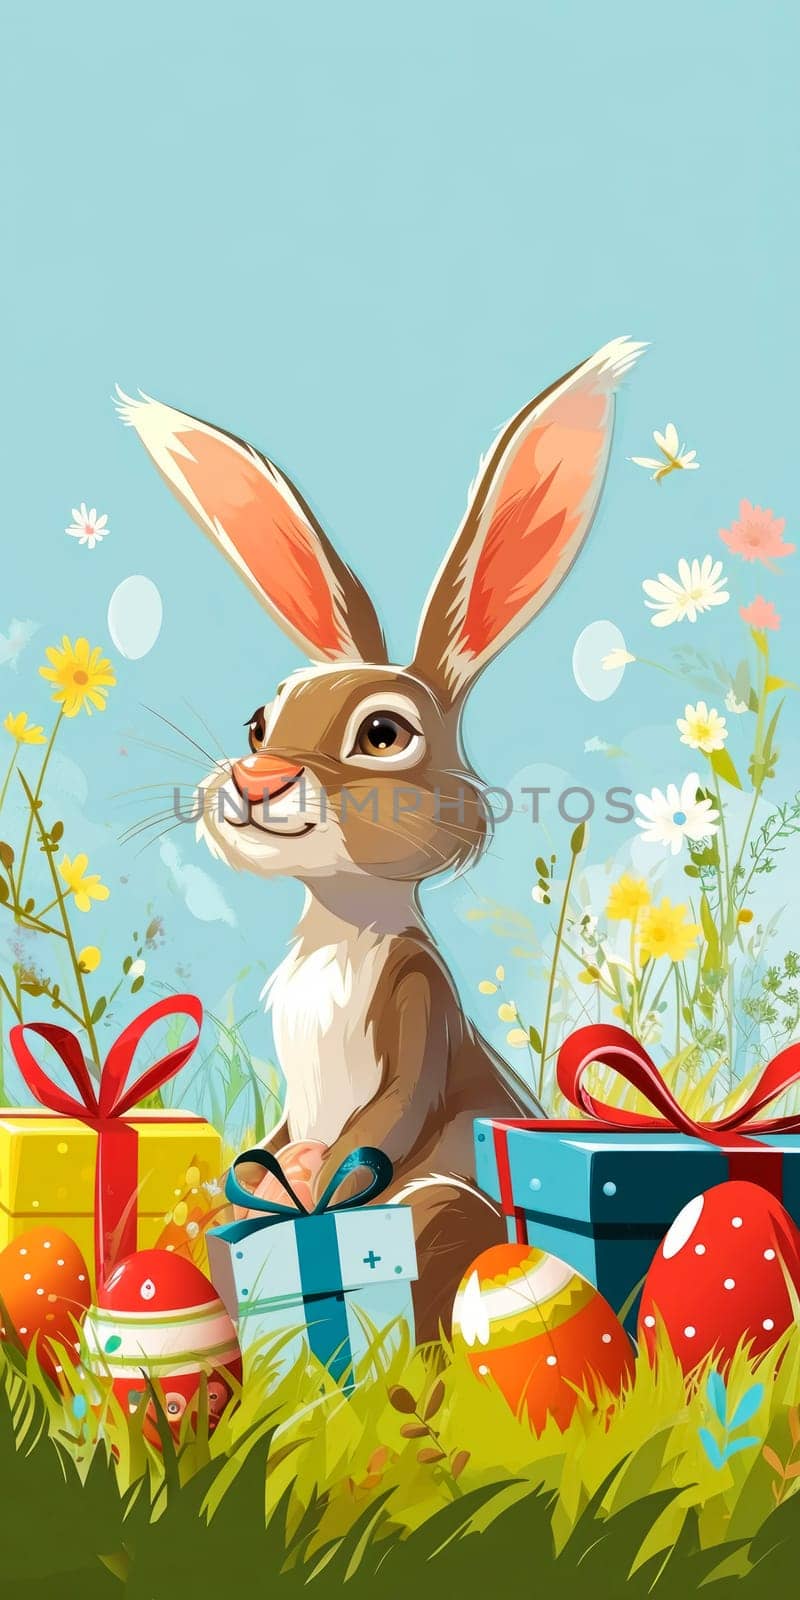 A vibrant Easter setting featuring a whimsical bunny among blooming flowers, colorful eggs, and gifts, with butterflies under a clear blue sky.